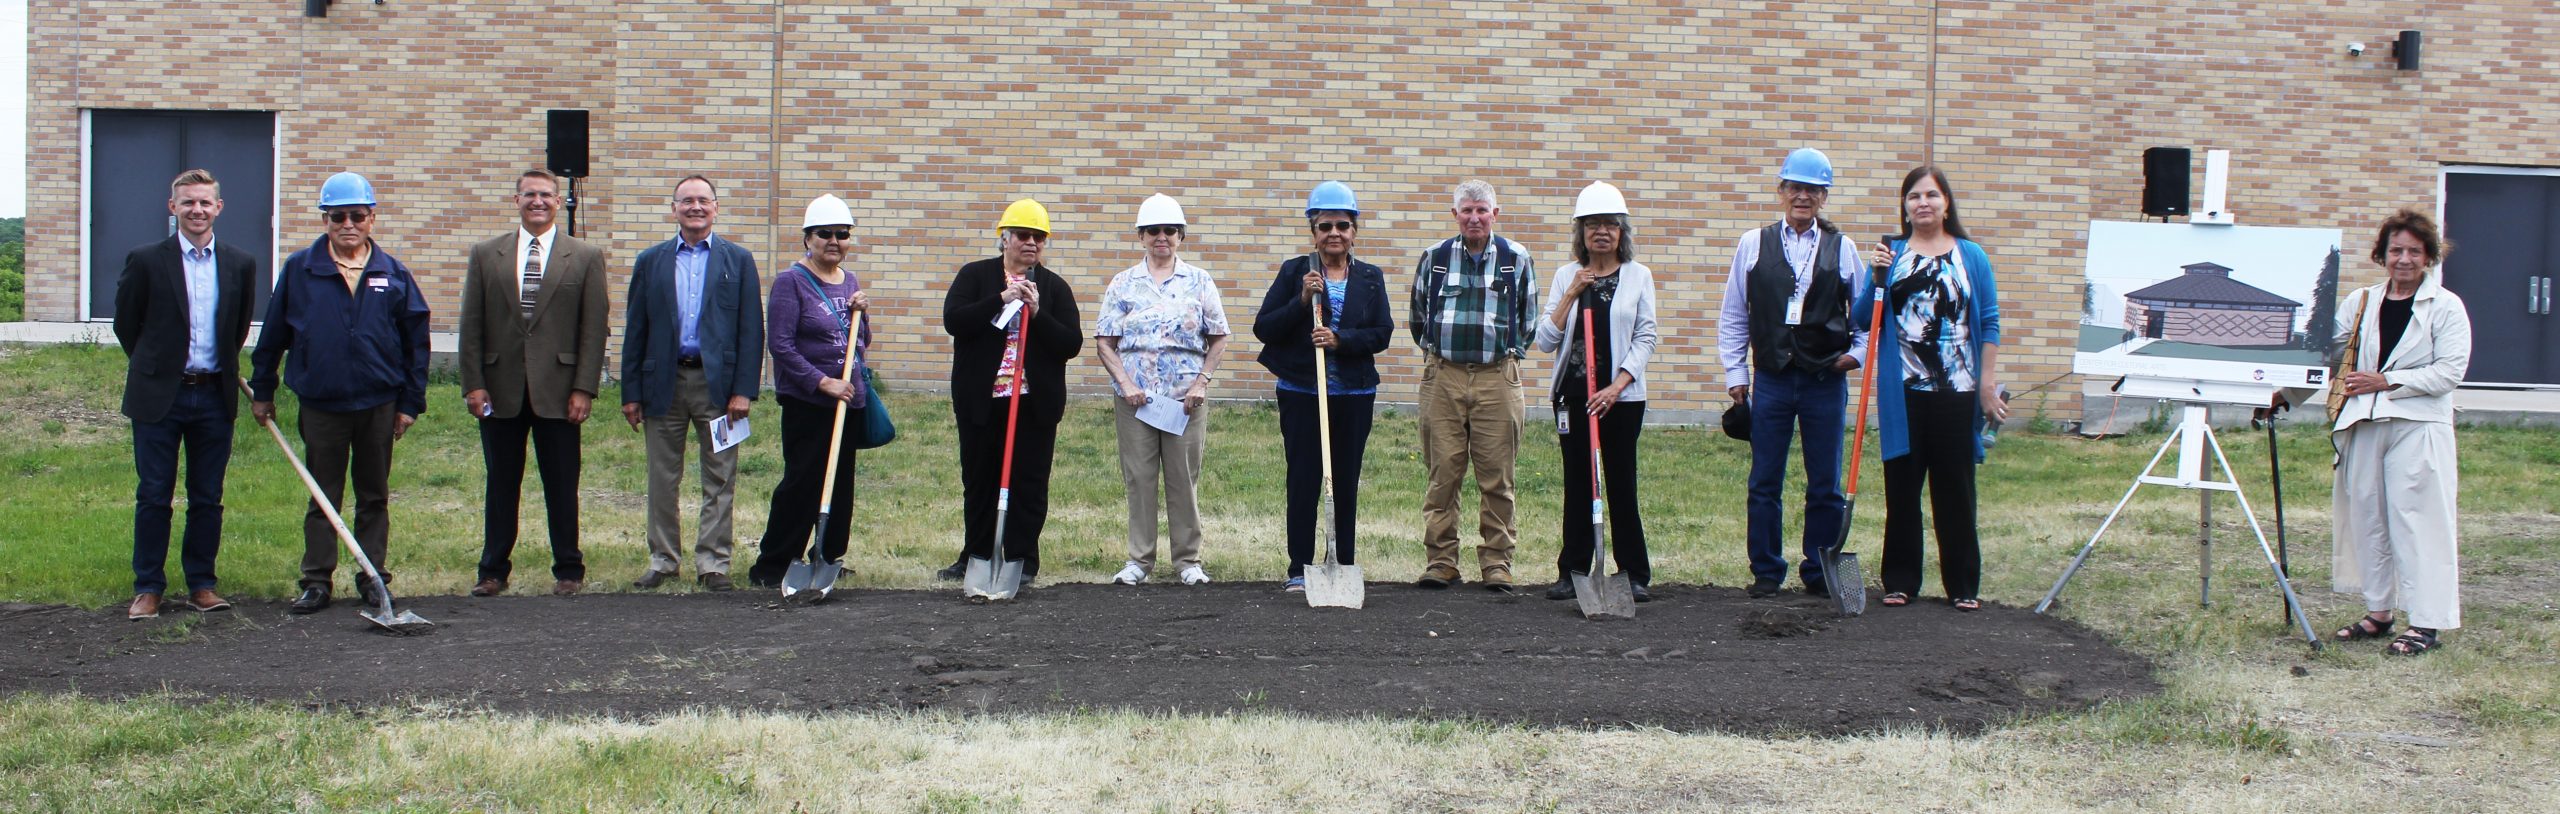 Groundbreaking of the Cultural Arts center